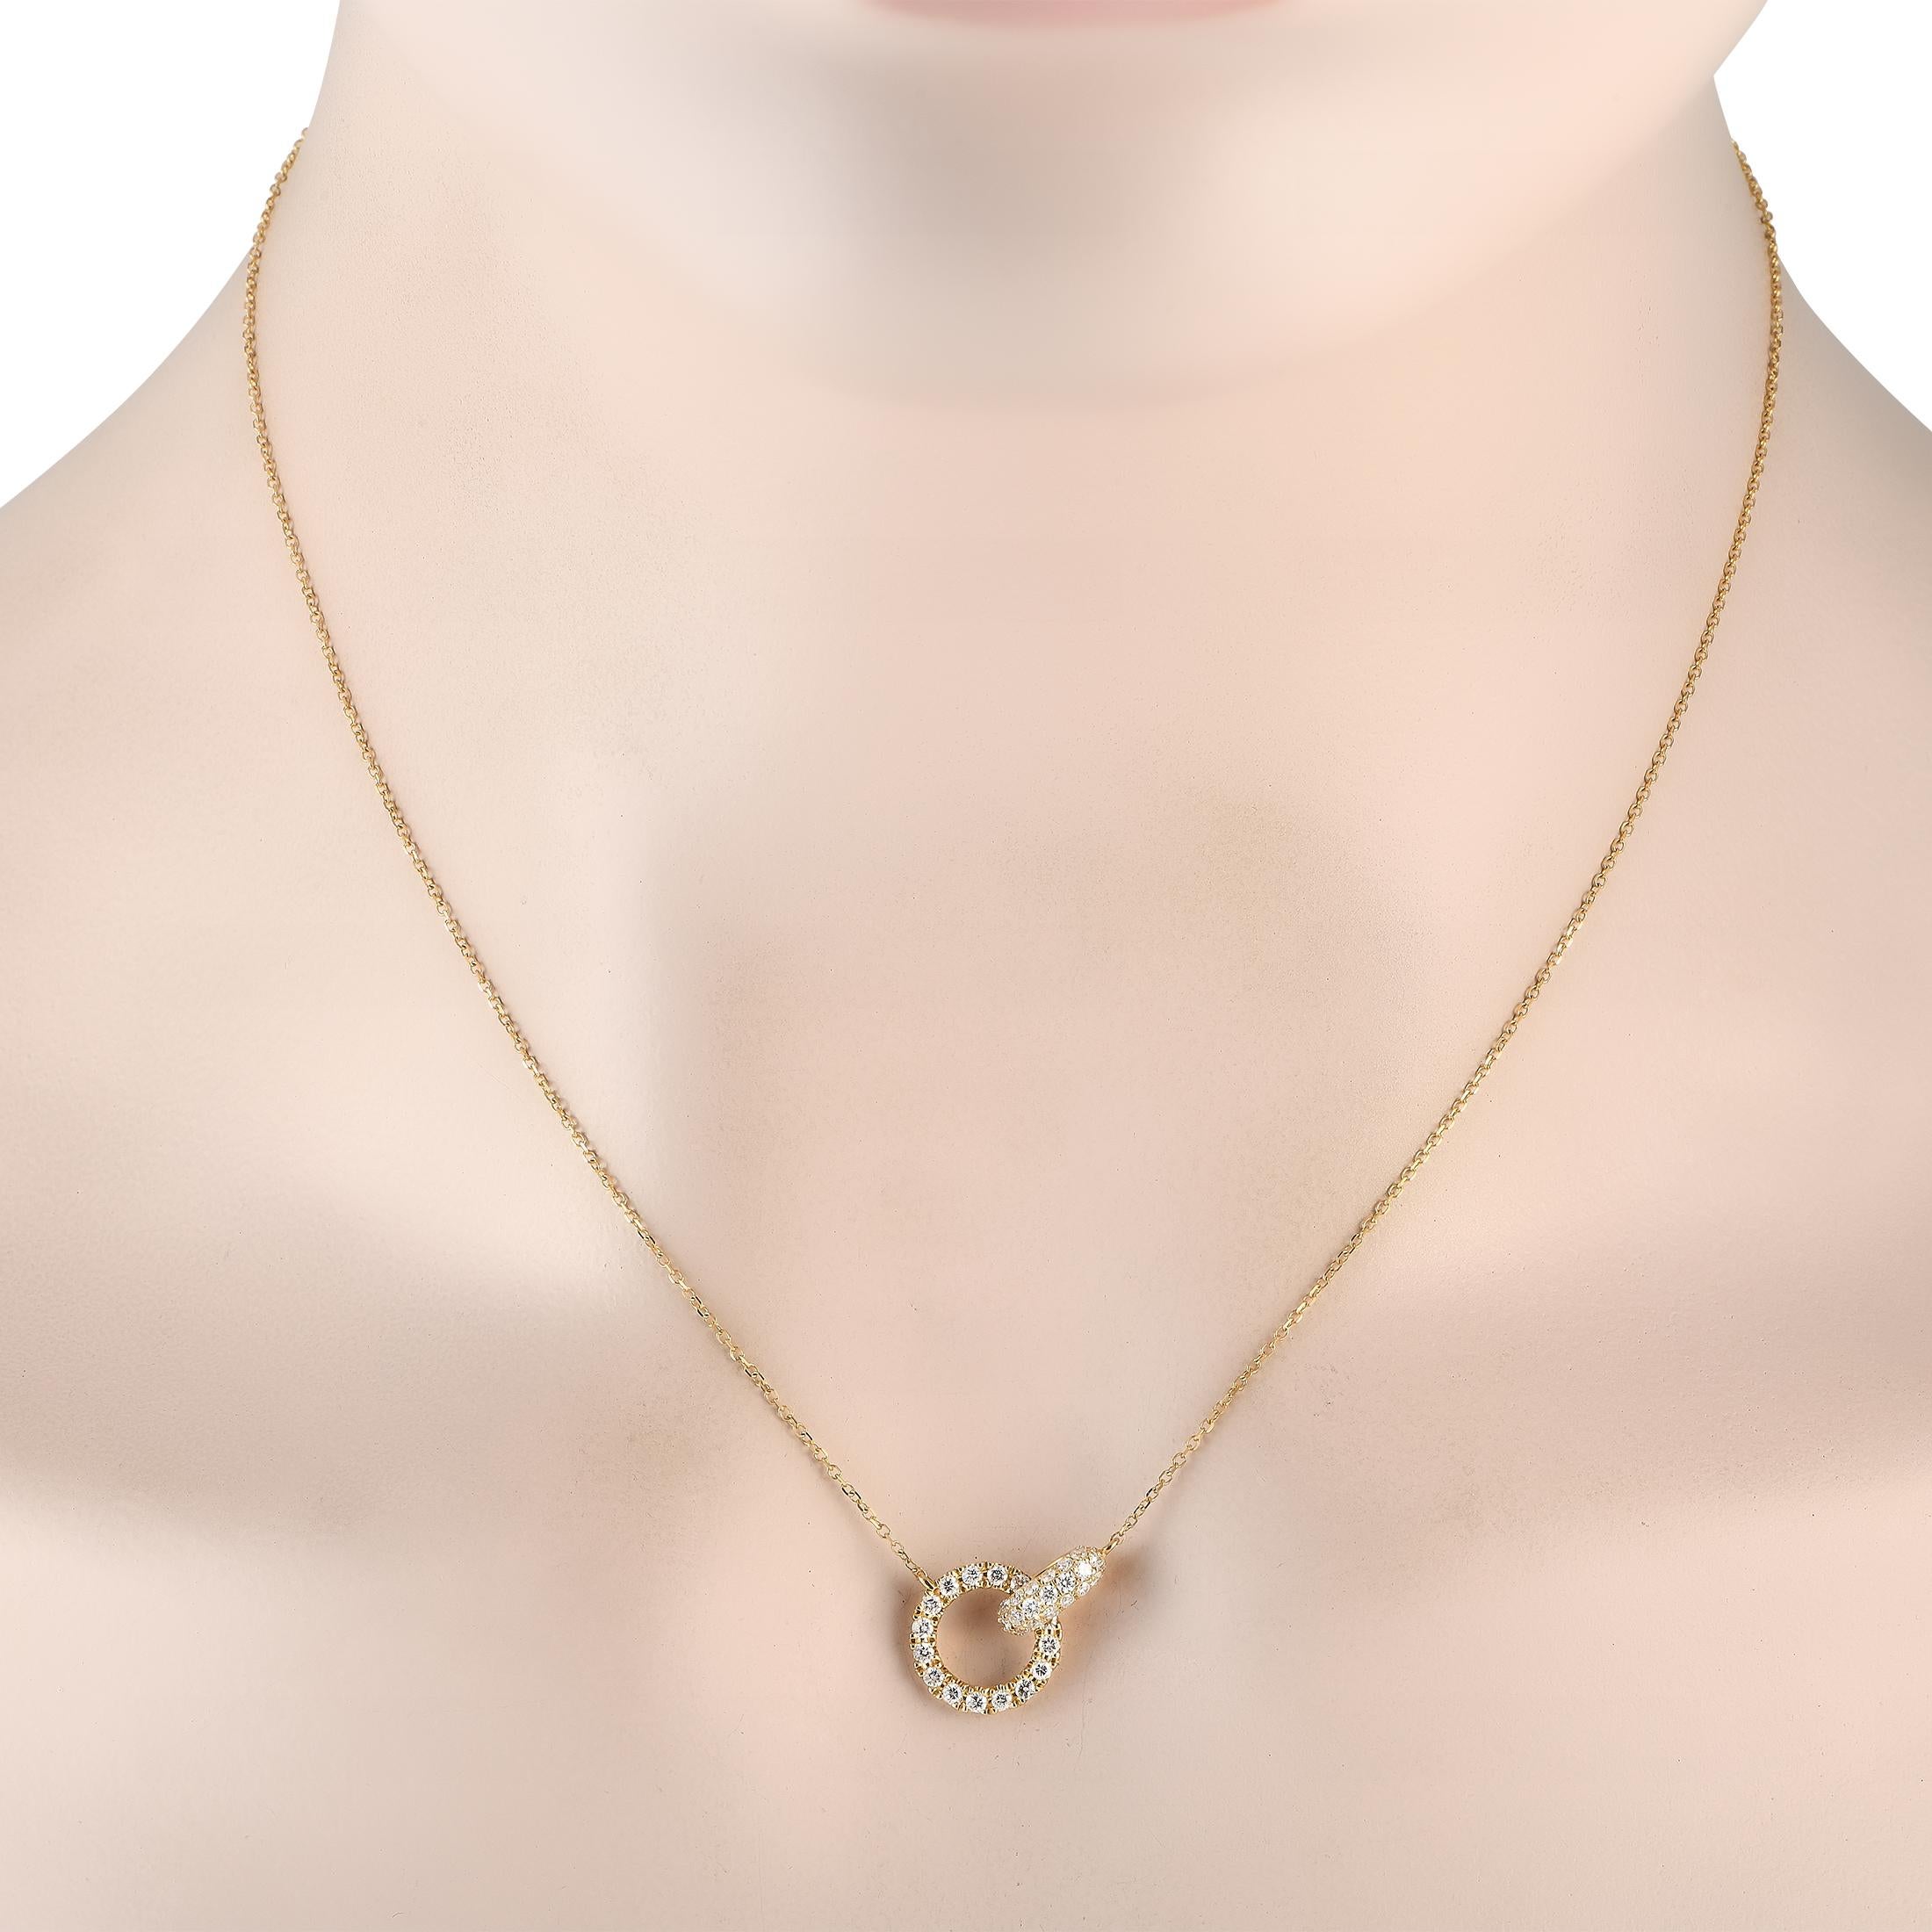 Clean lines, small size, and restrained sparkle characterize the minimalist beauty of this piece. The 16 necklace chain with a lobster clasp holds a 0.5 by 0.65 pendant composed of two circles linked together. The flat circle comes neatly outlined